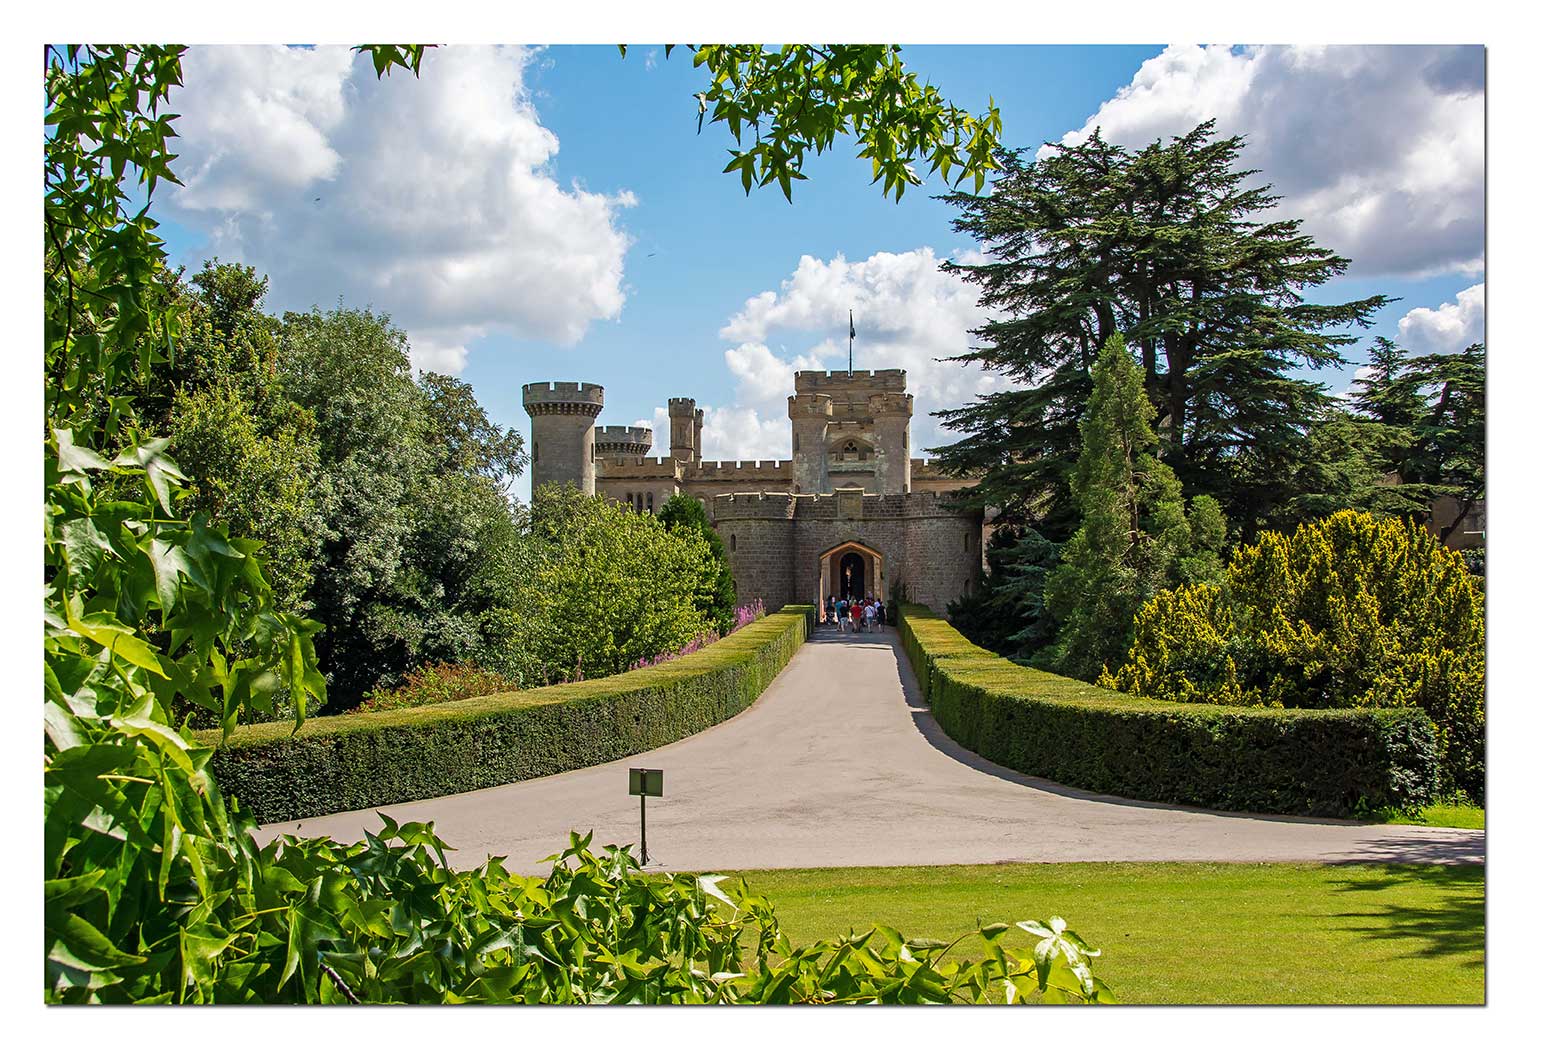 Eastnor Castle is a 19th-century mock or revival castle, two miles from the town of Ledbury in Herefordshire, England, by the village of Eastnor.